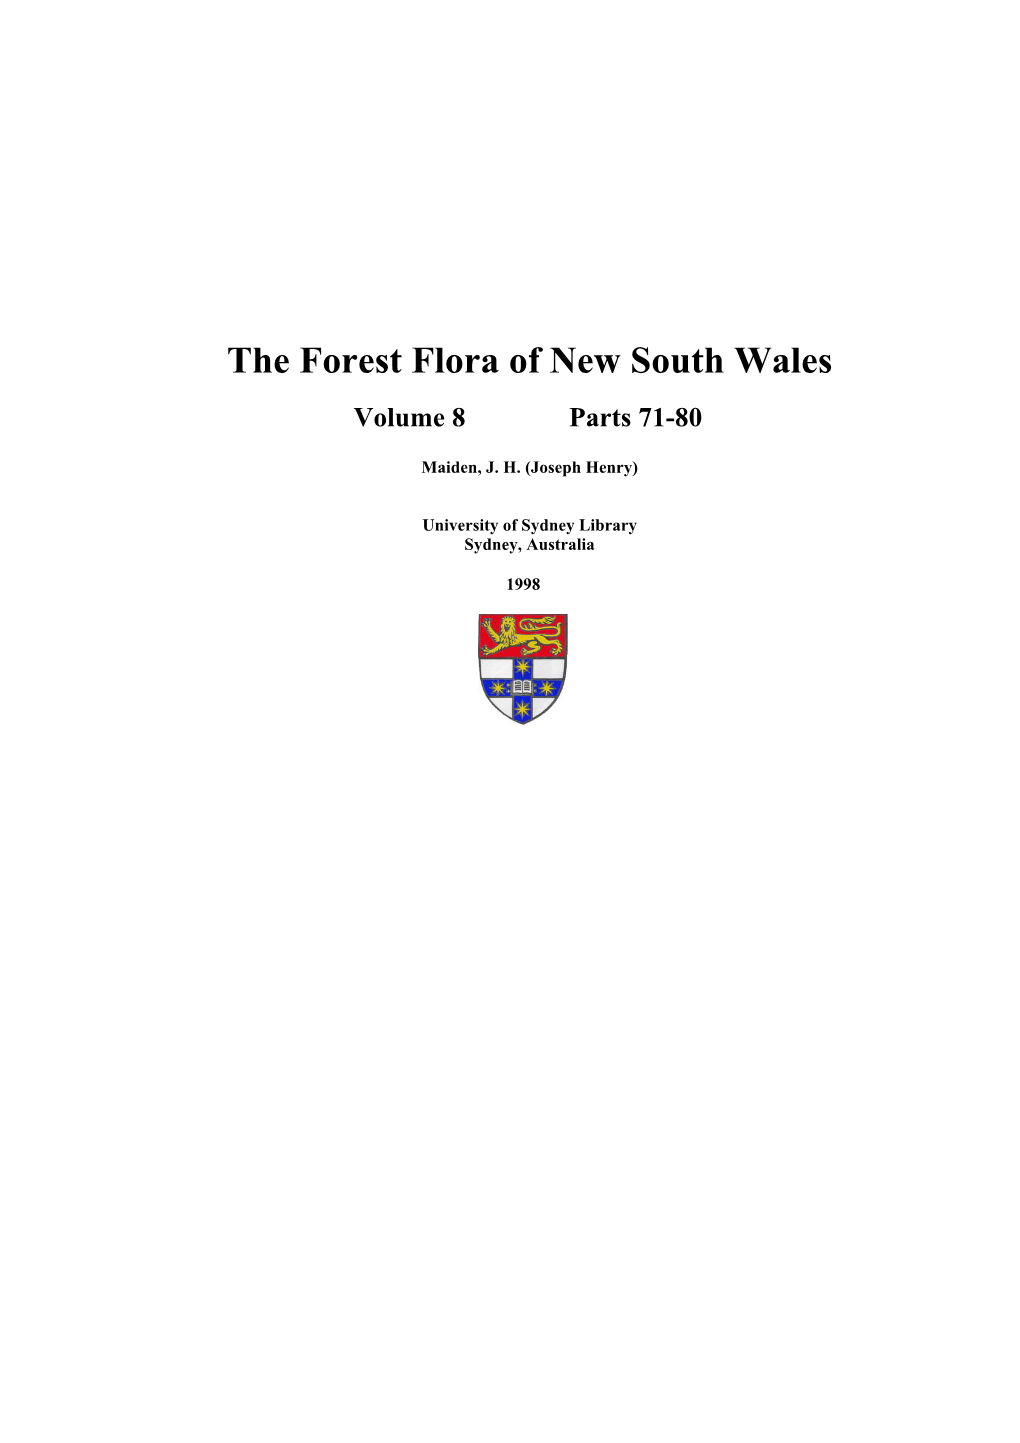 The Forest Flora of New South Wales Volume 8 Parts 71-80